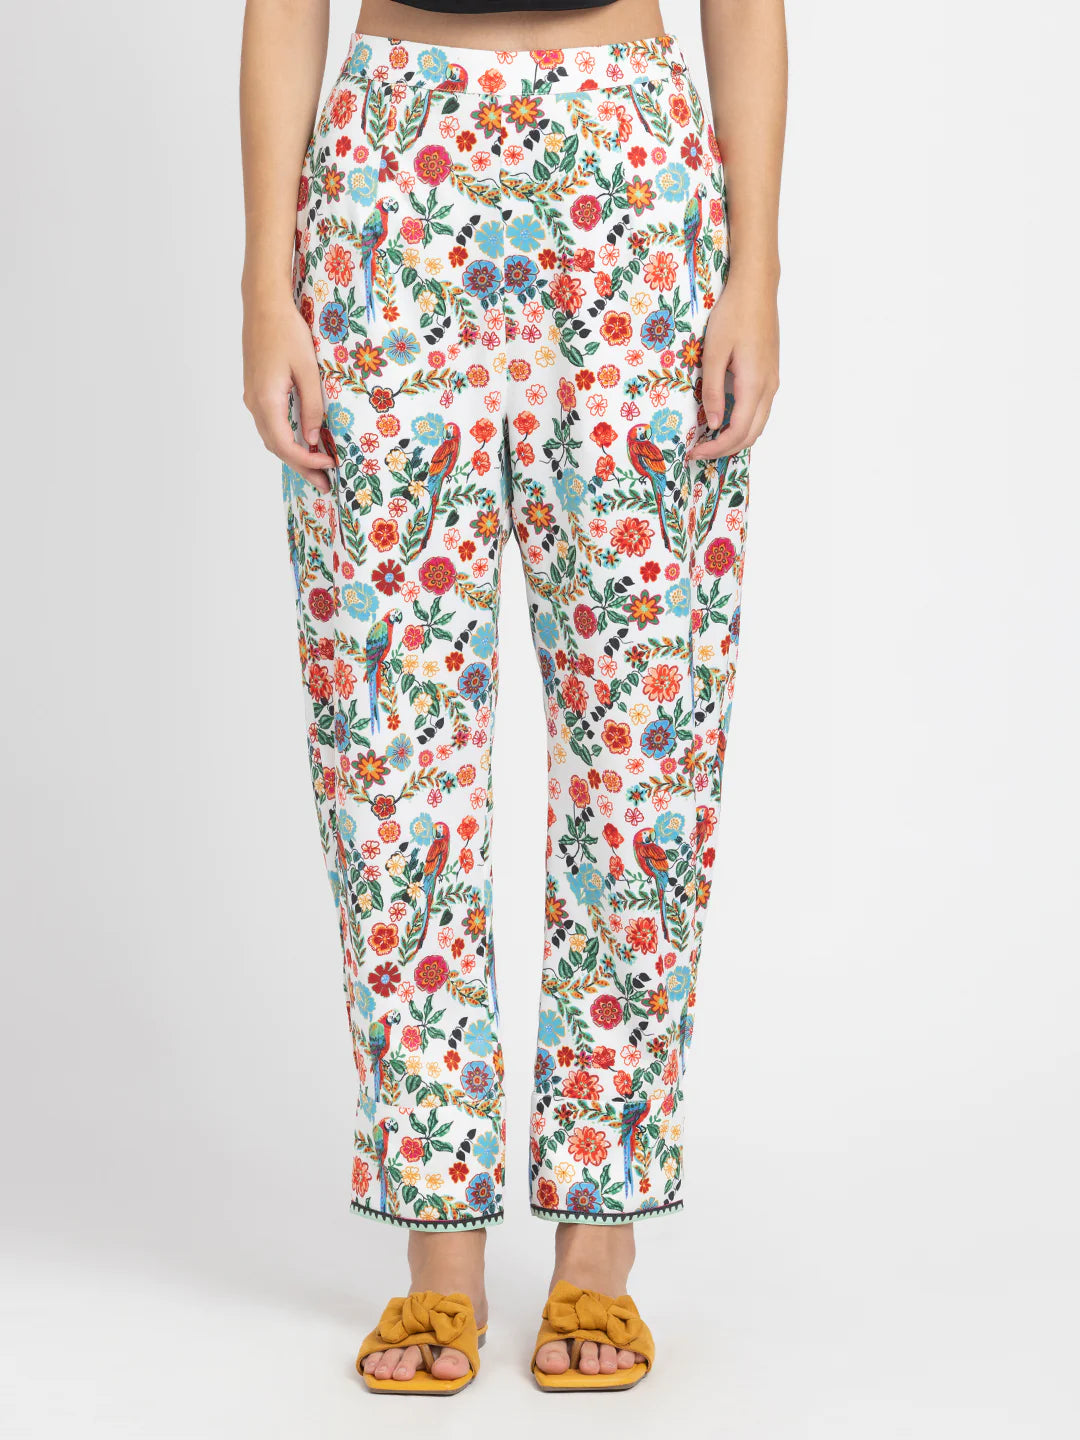 Floral Pary Pant for Women | Floral Radiance Party Pant